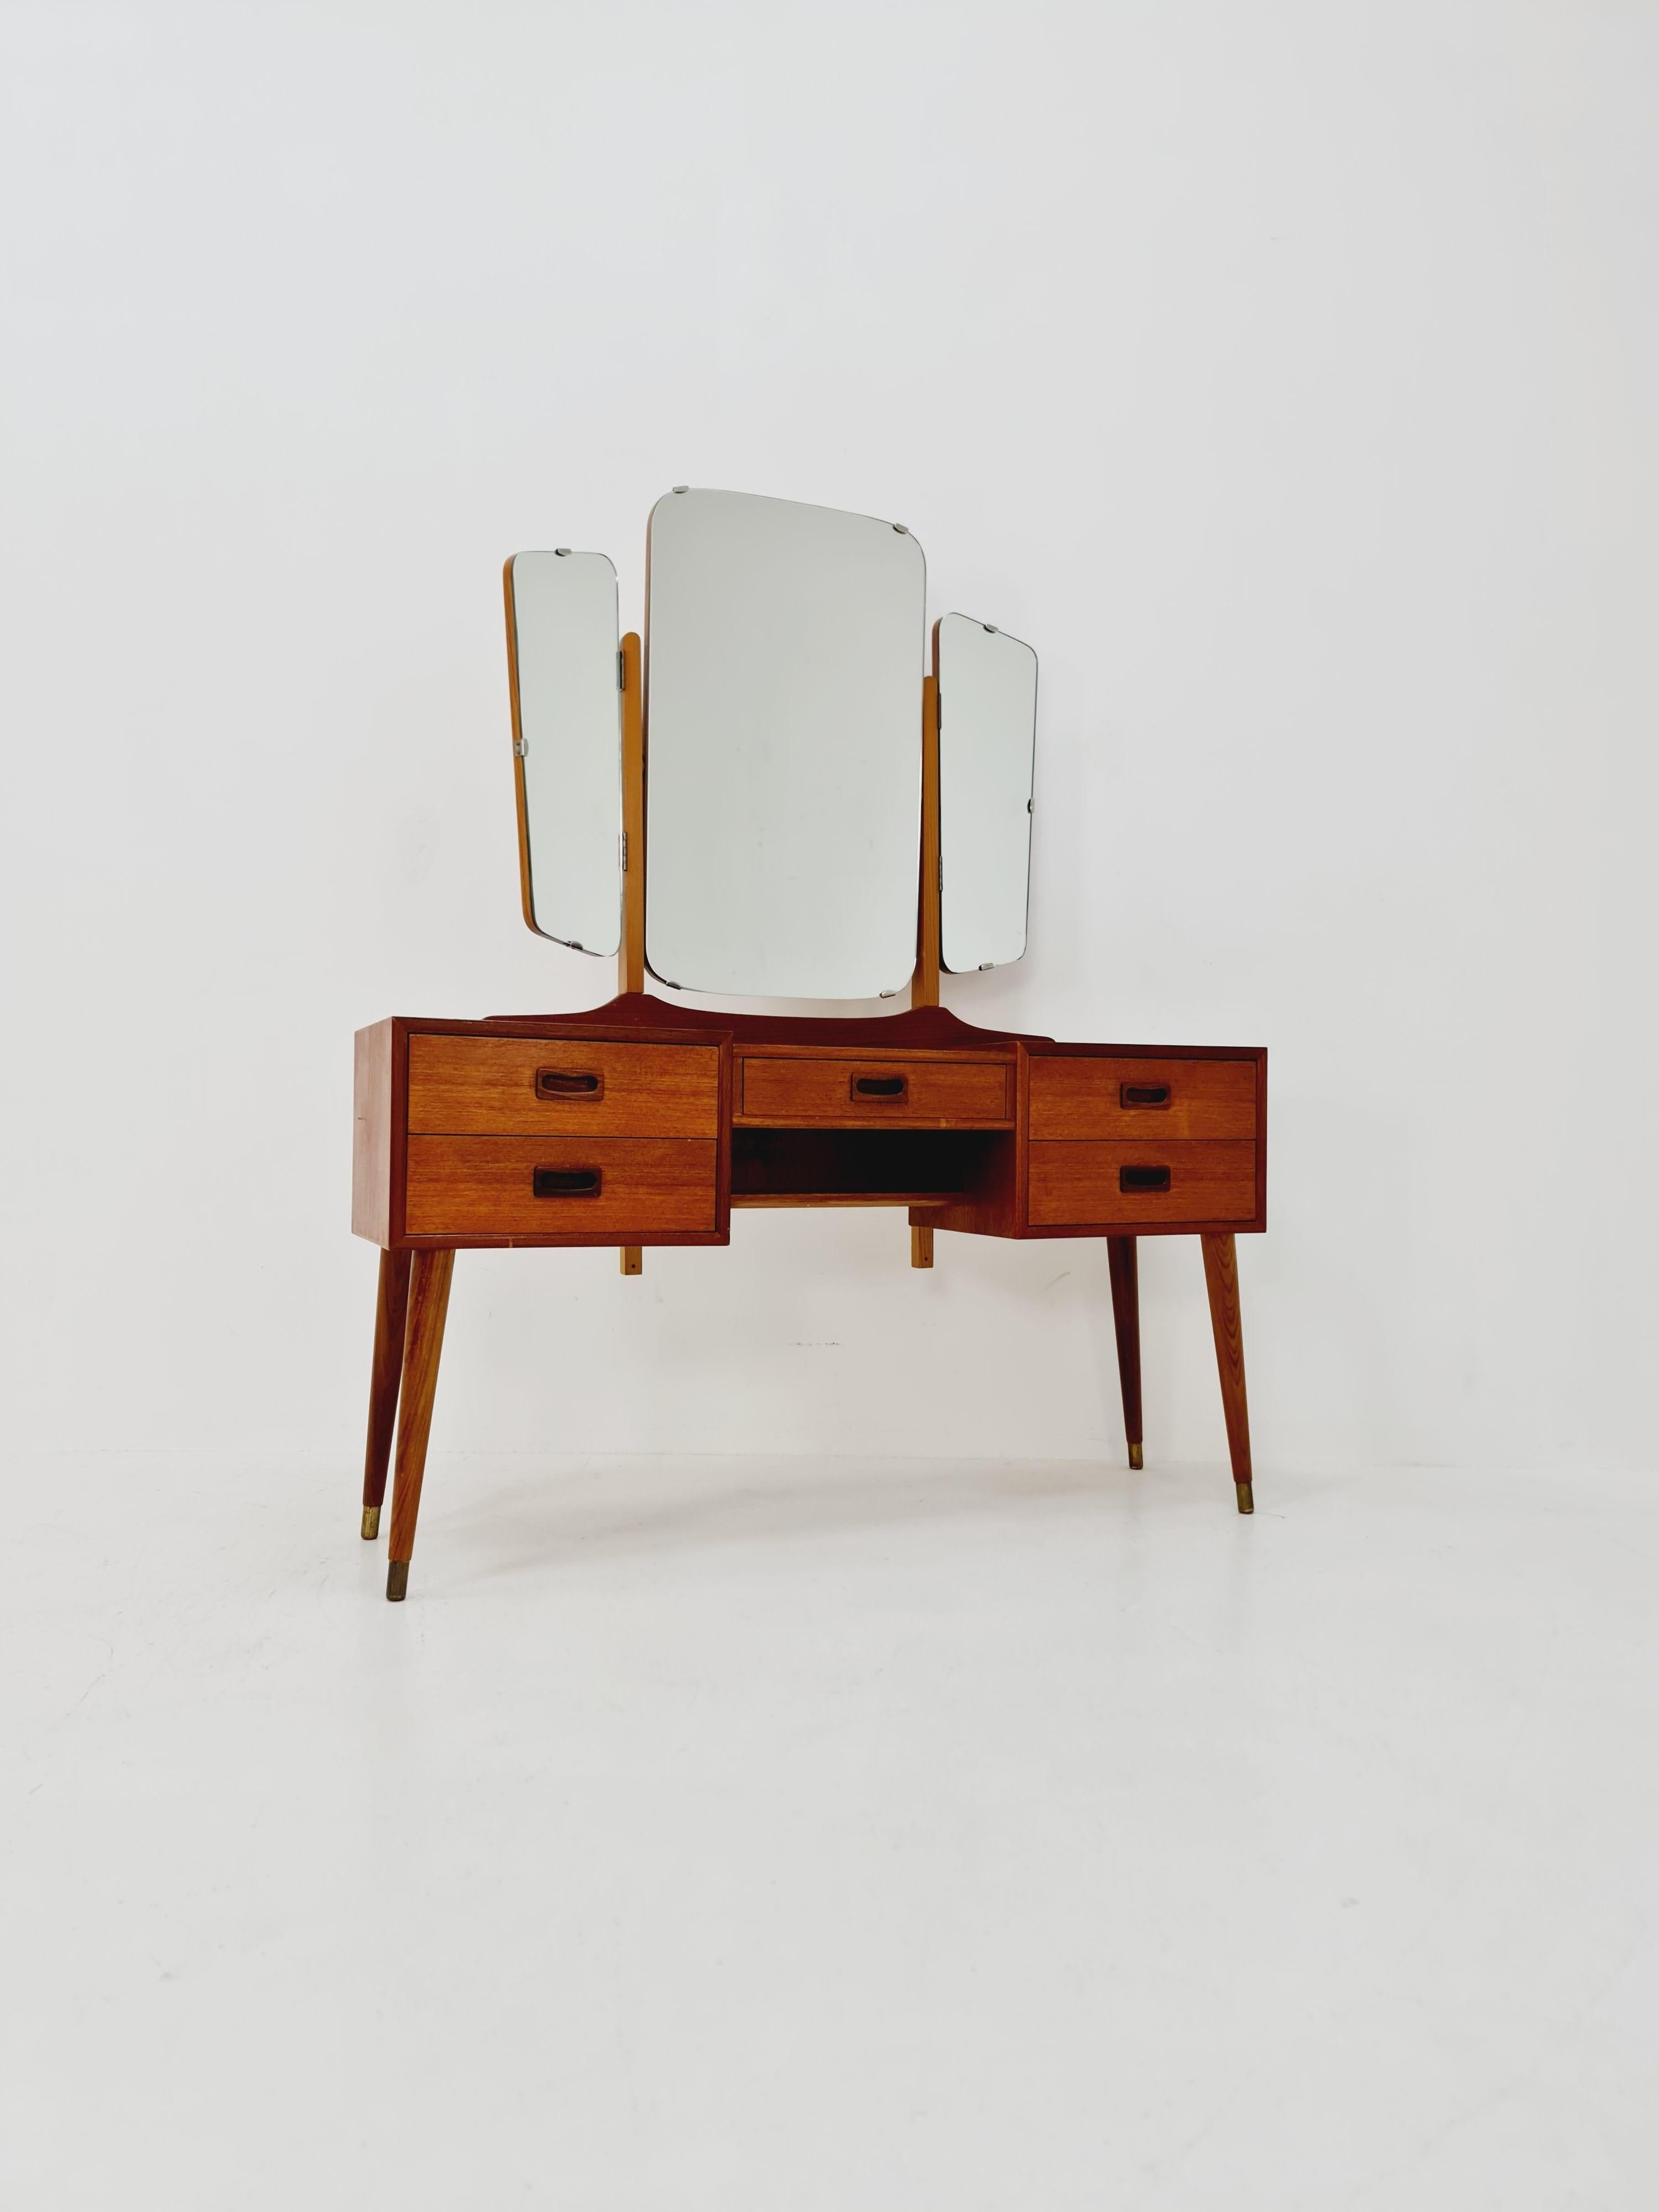 Mid Century Modern Danish Teak vanity table/ make up table from the 60s

by Fröseke for AB Nybrofabriken

Stool is included

Design year: 1960s

Dimension:
32 D x 119  W x 64 cm H, with mirror 140 H cm

Stool Dimension:
38 D  x 47 W x42 H

It is in